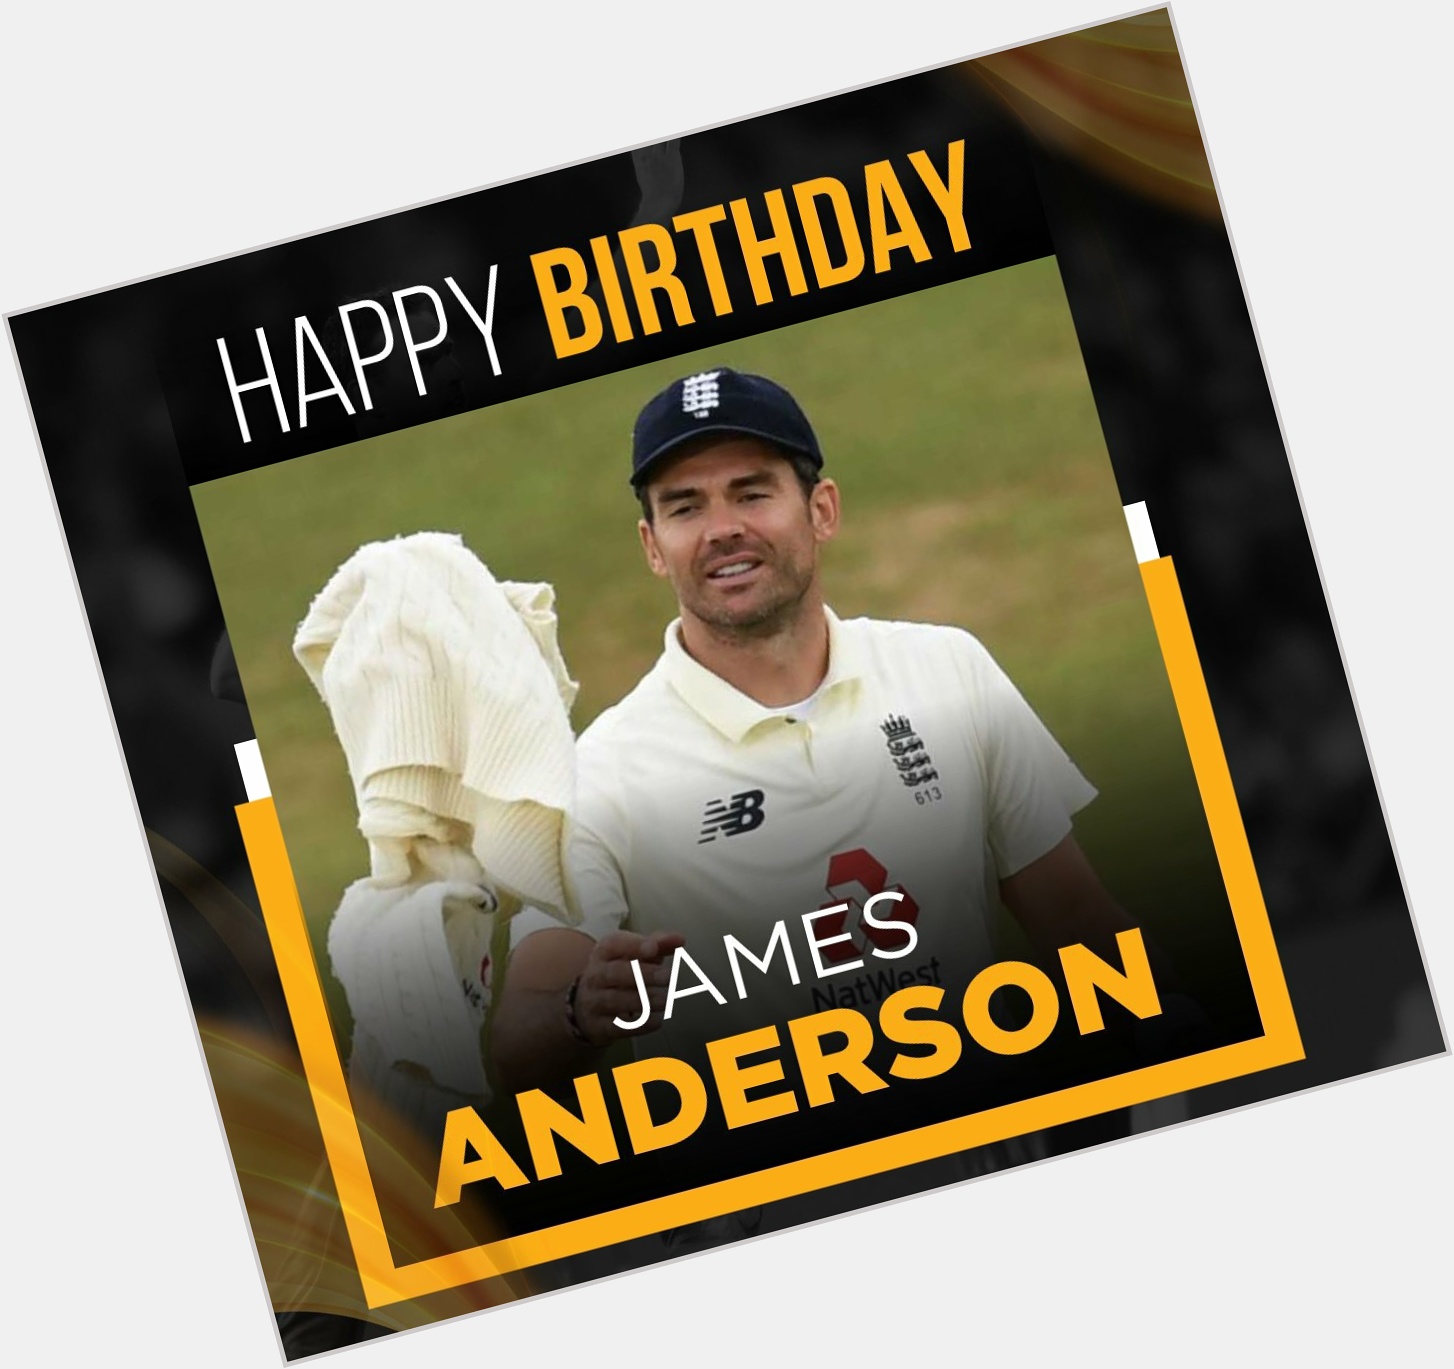 Wishing king of swing James Anderson a very happy birthday. 